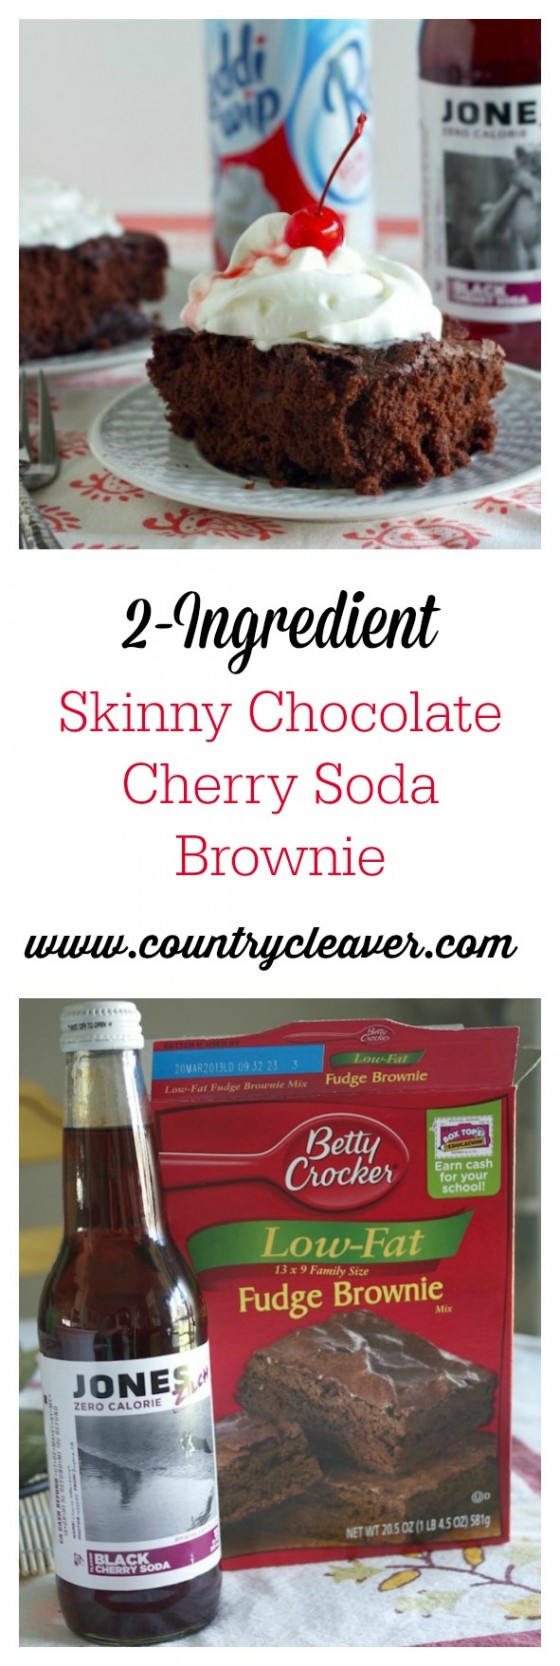 2-Ingredient Diet Chocolate Cherry Brownies -- Low Fat Diet Brownies that are perfectly chewy for all those chocolate cravings! (1)